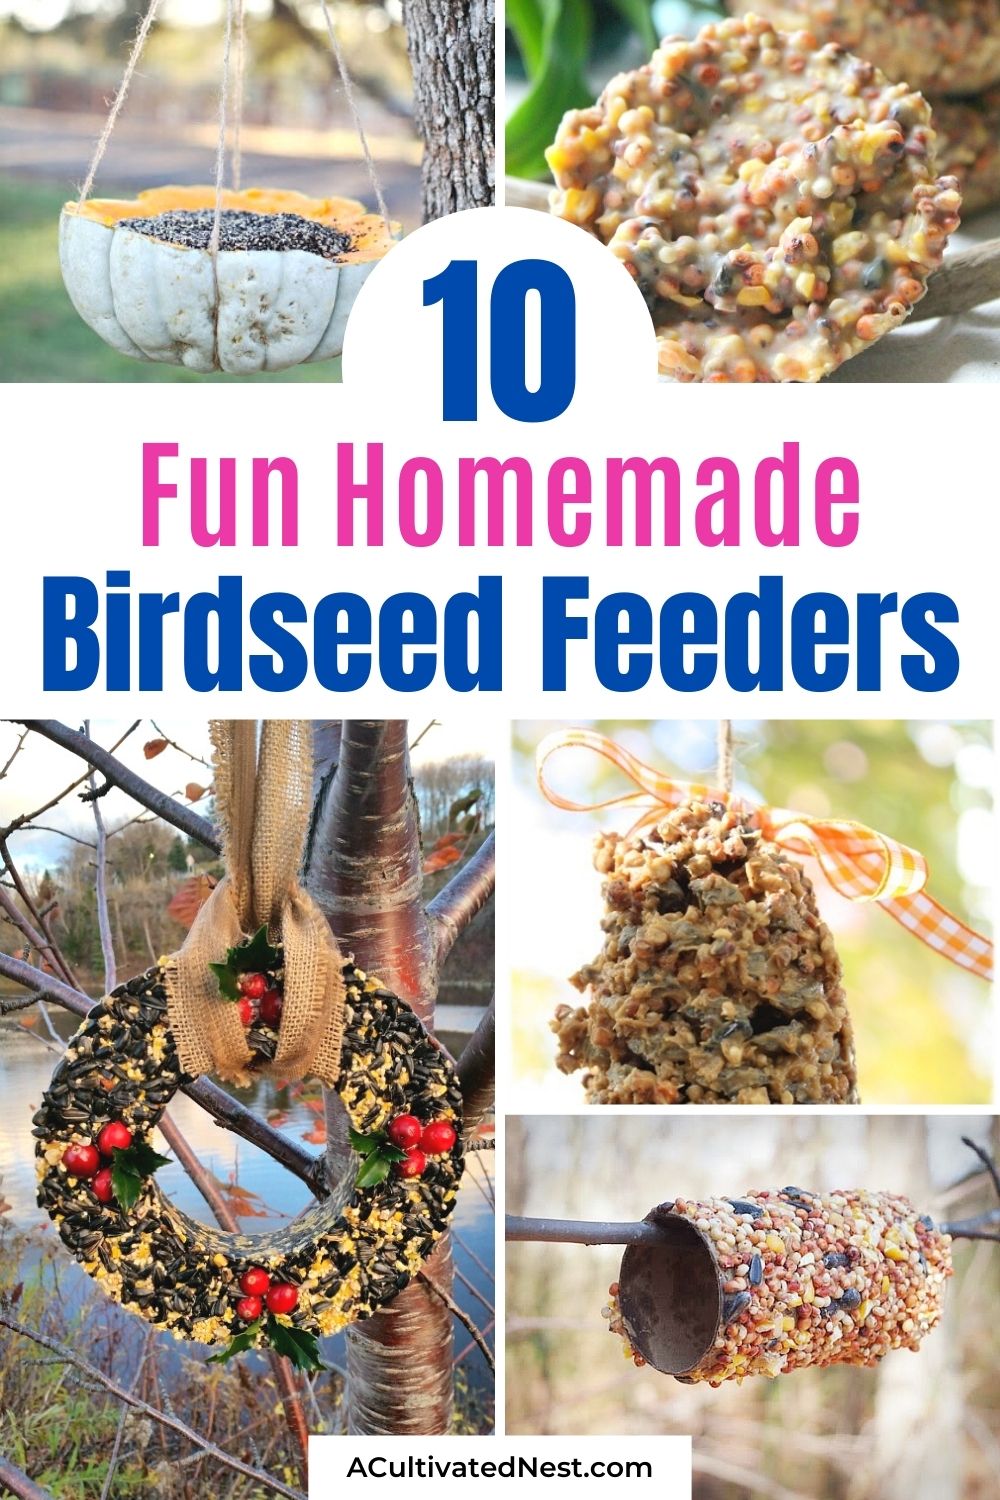 10 Homemade Birdseed Feeders- These 10 DIY birdseed feeders are fun to make and will help attract all kinds of beautiful birds to your yard! These make great kids crafts, too! | #birdseedFeeder #homemadeBirdFeeder #crafts #diyProjects #ACultivatedNest